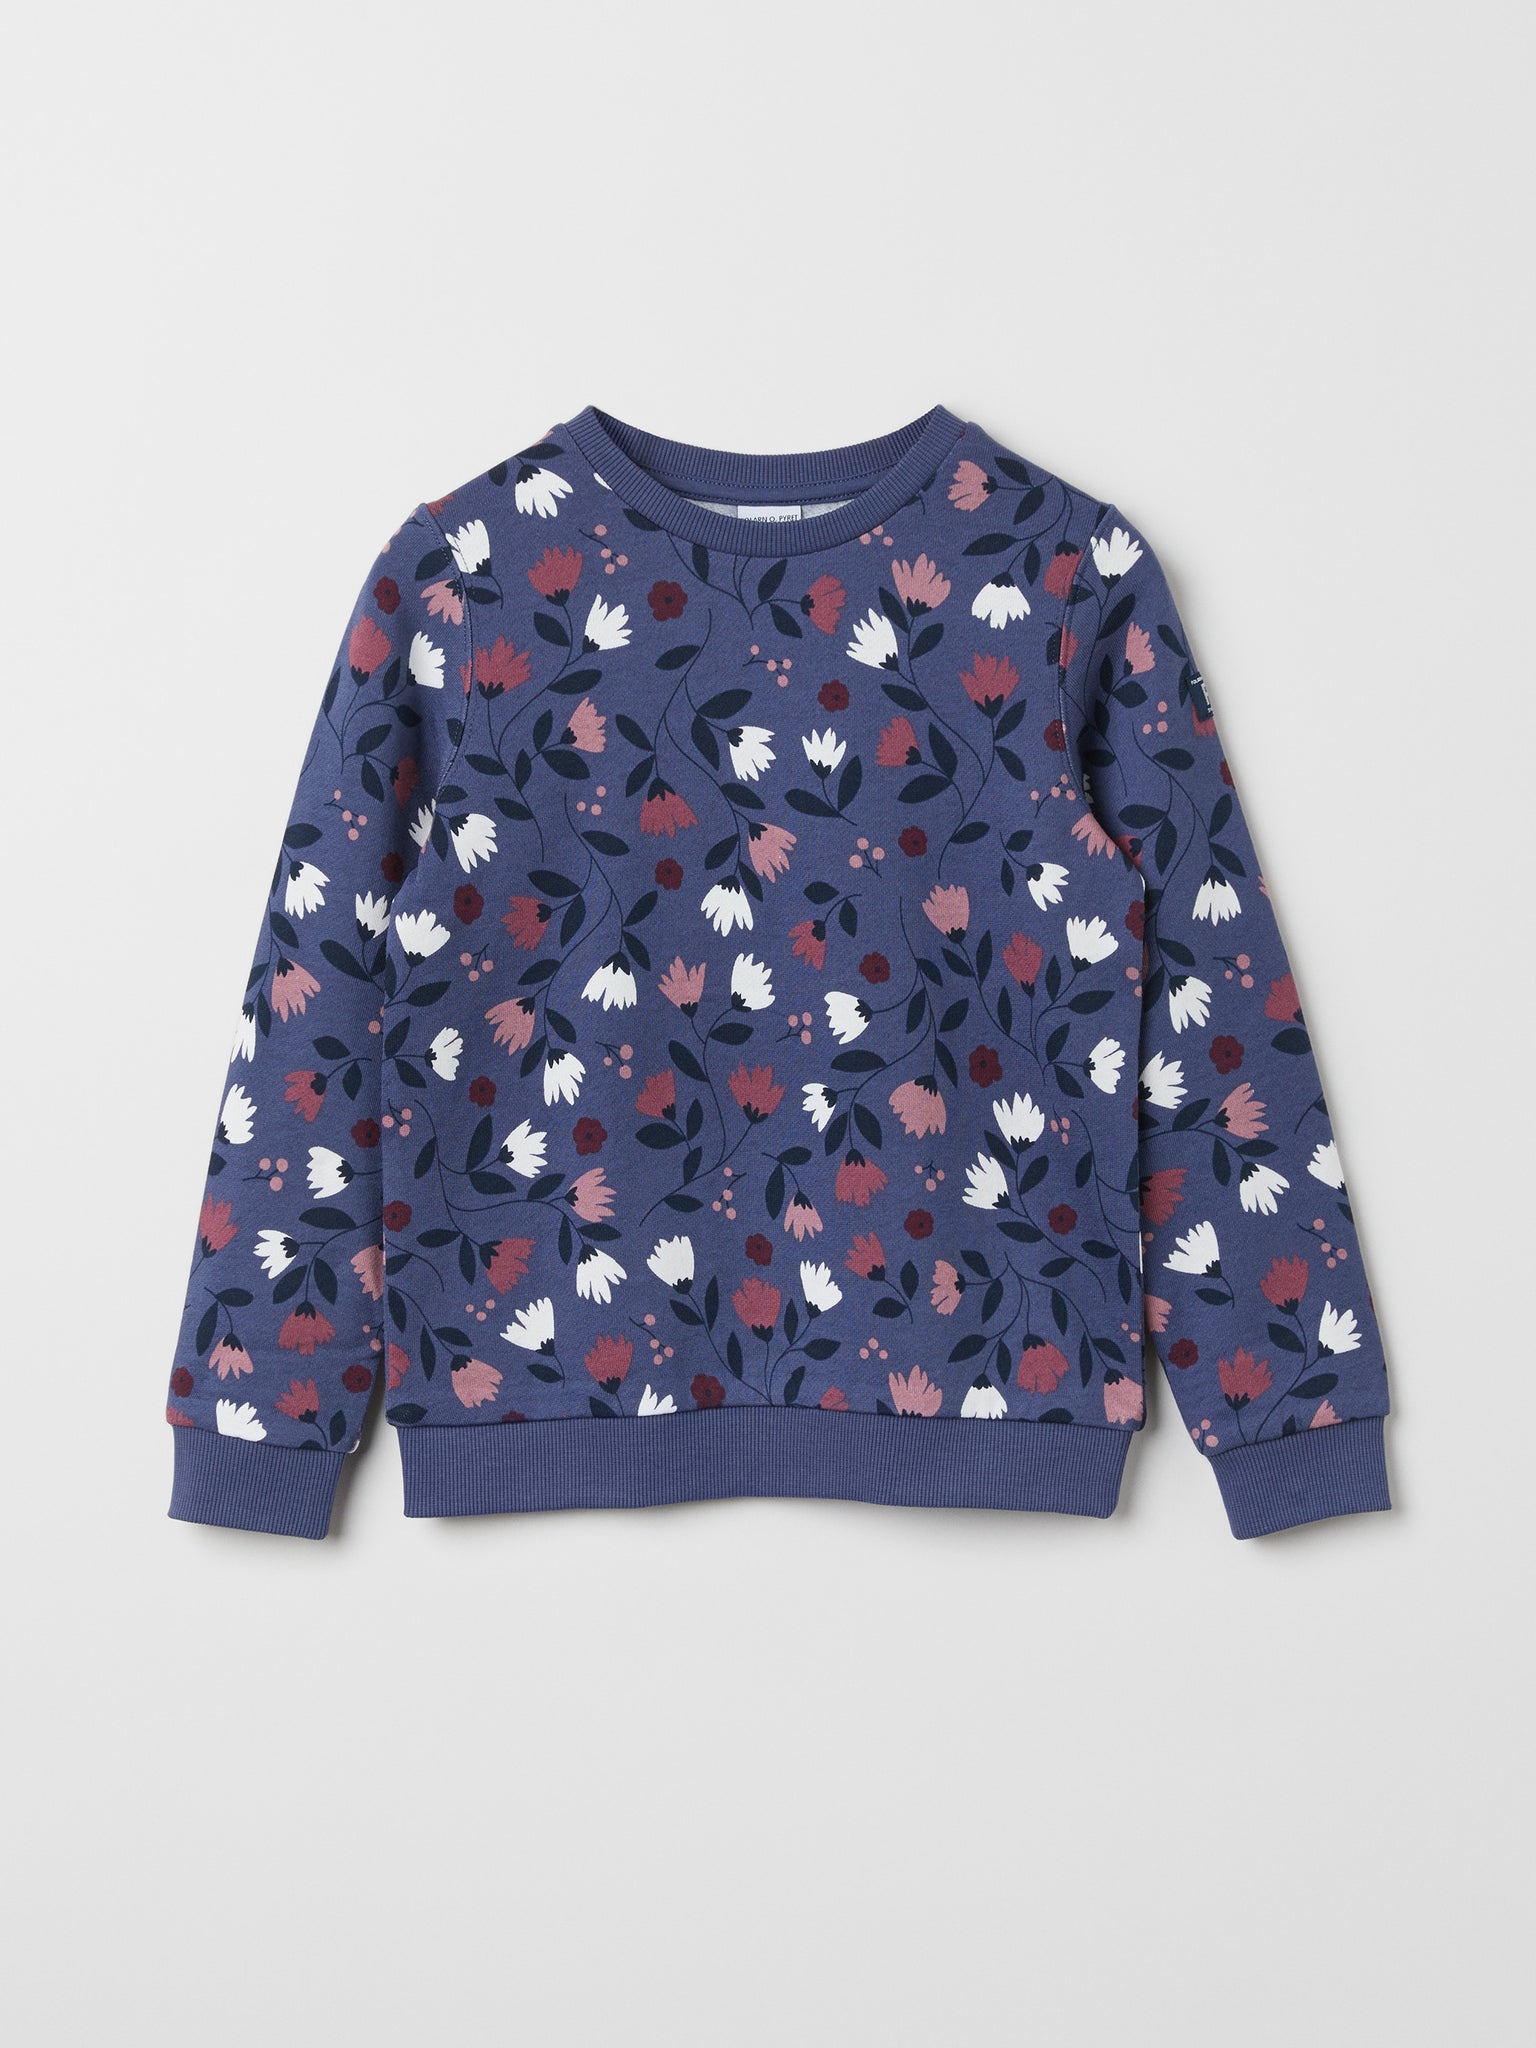 Organic Cotton Floral Kids Sweatshirt from the Polarn O. Pyret kidswear collection. The best ethical kids clothes